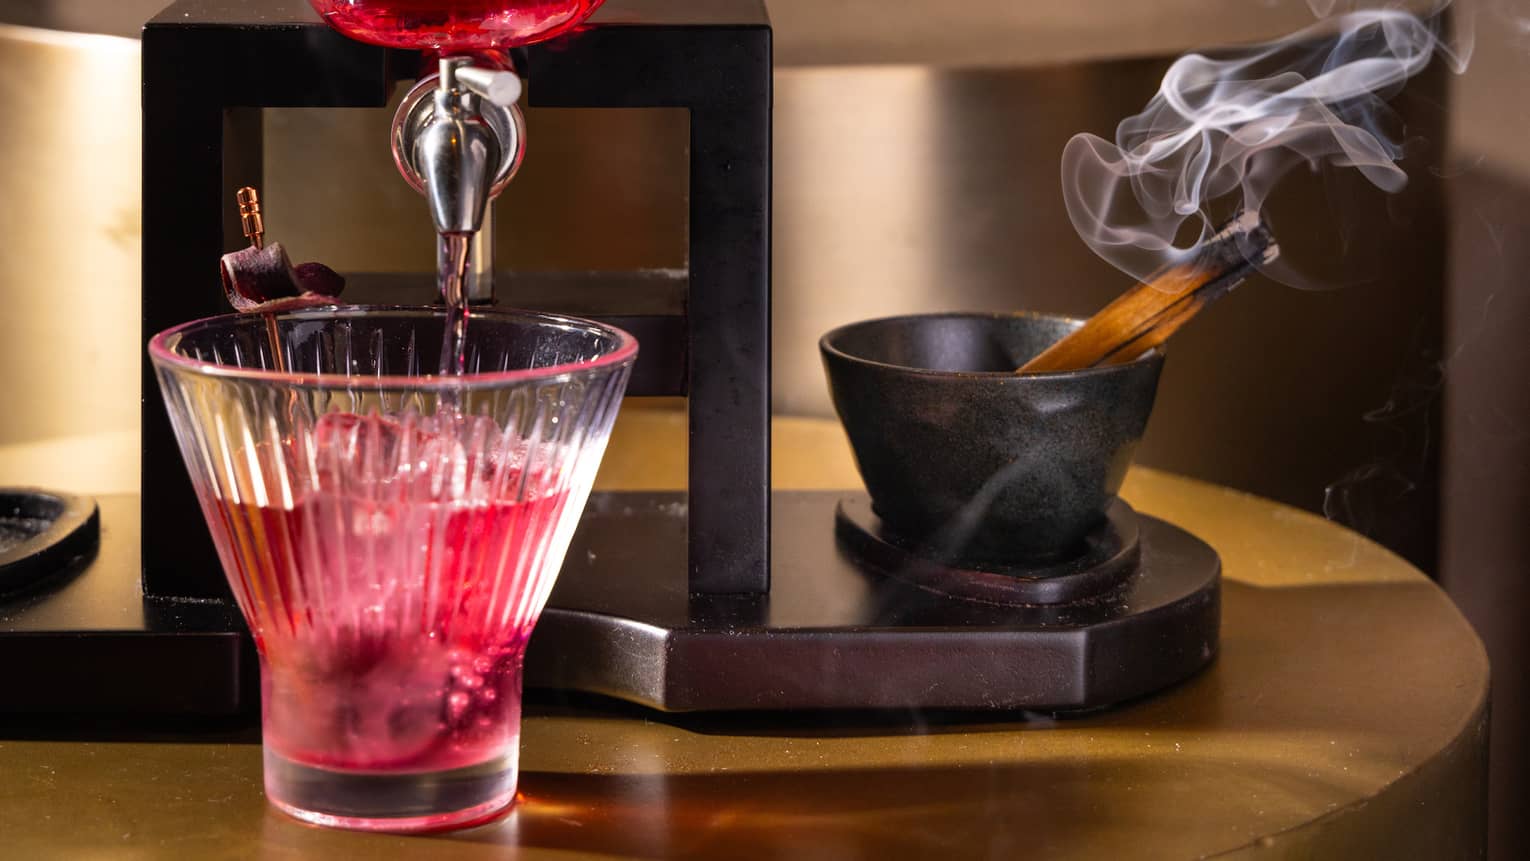 A red cocktail coming out a glass skull.